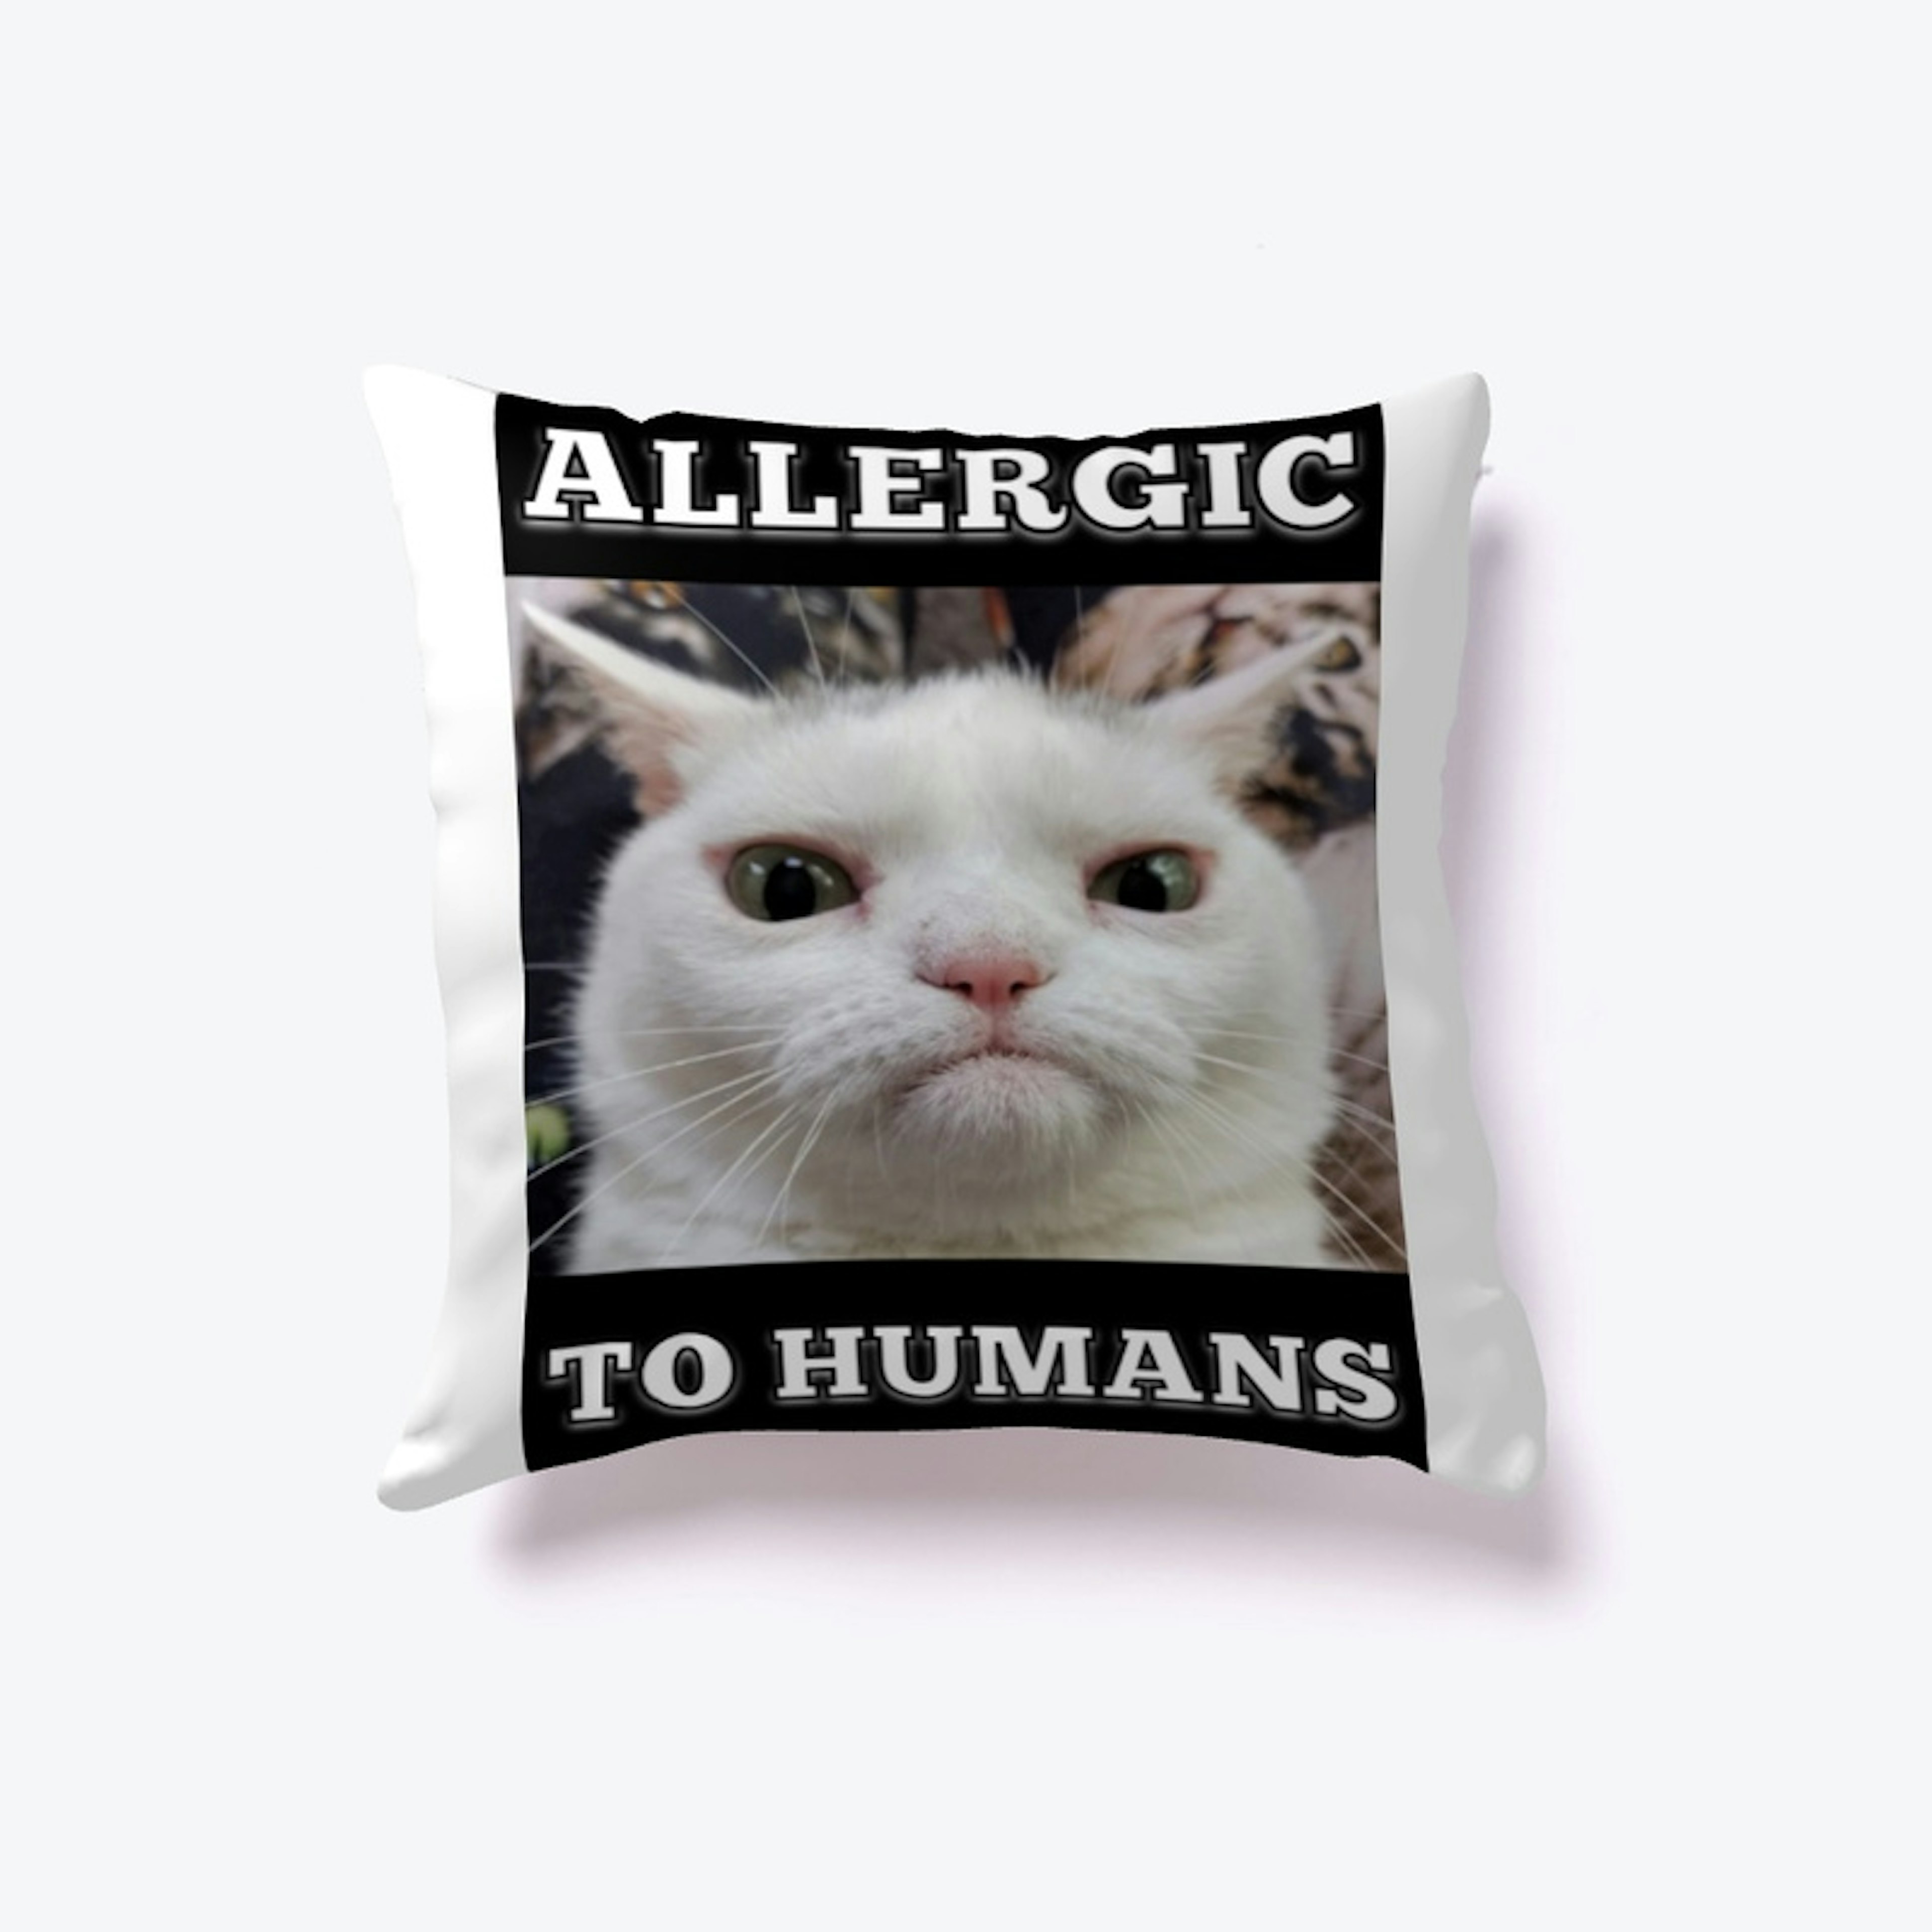 Allergic to Humans Pillow